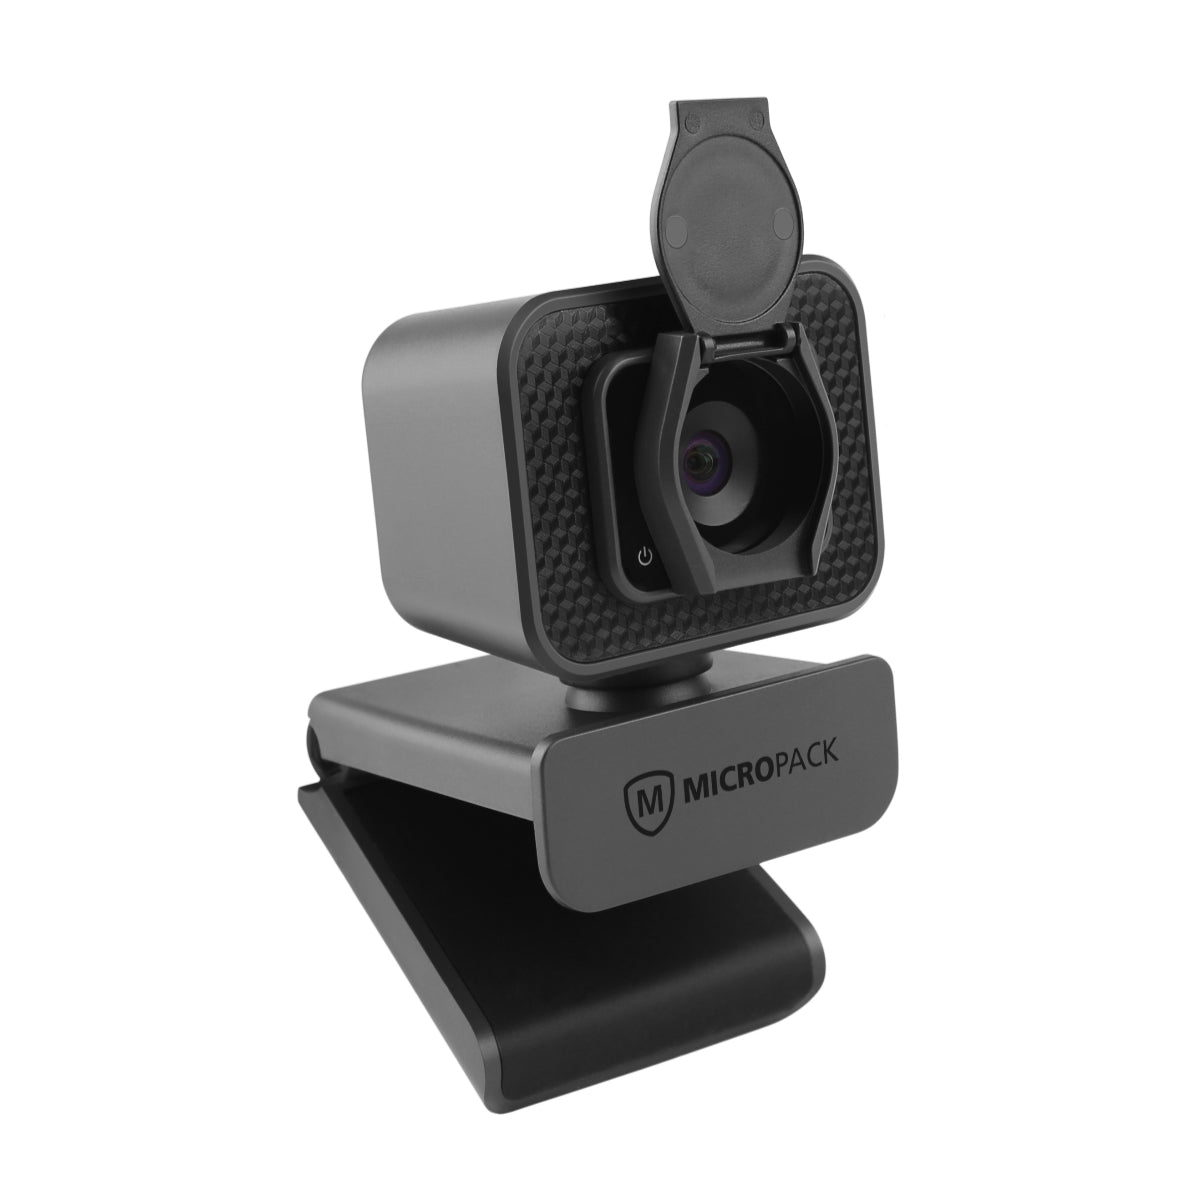 Supply 1080P Webcam for PC Laptop MICROPACK MWB-15